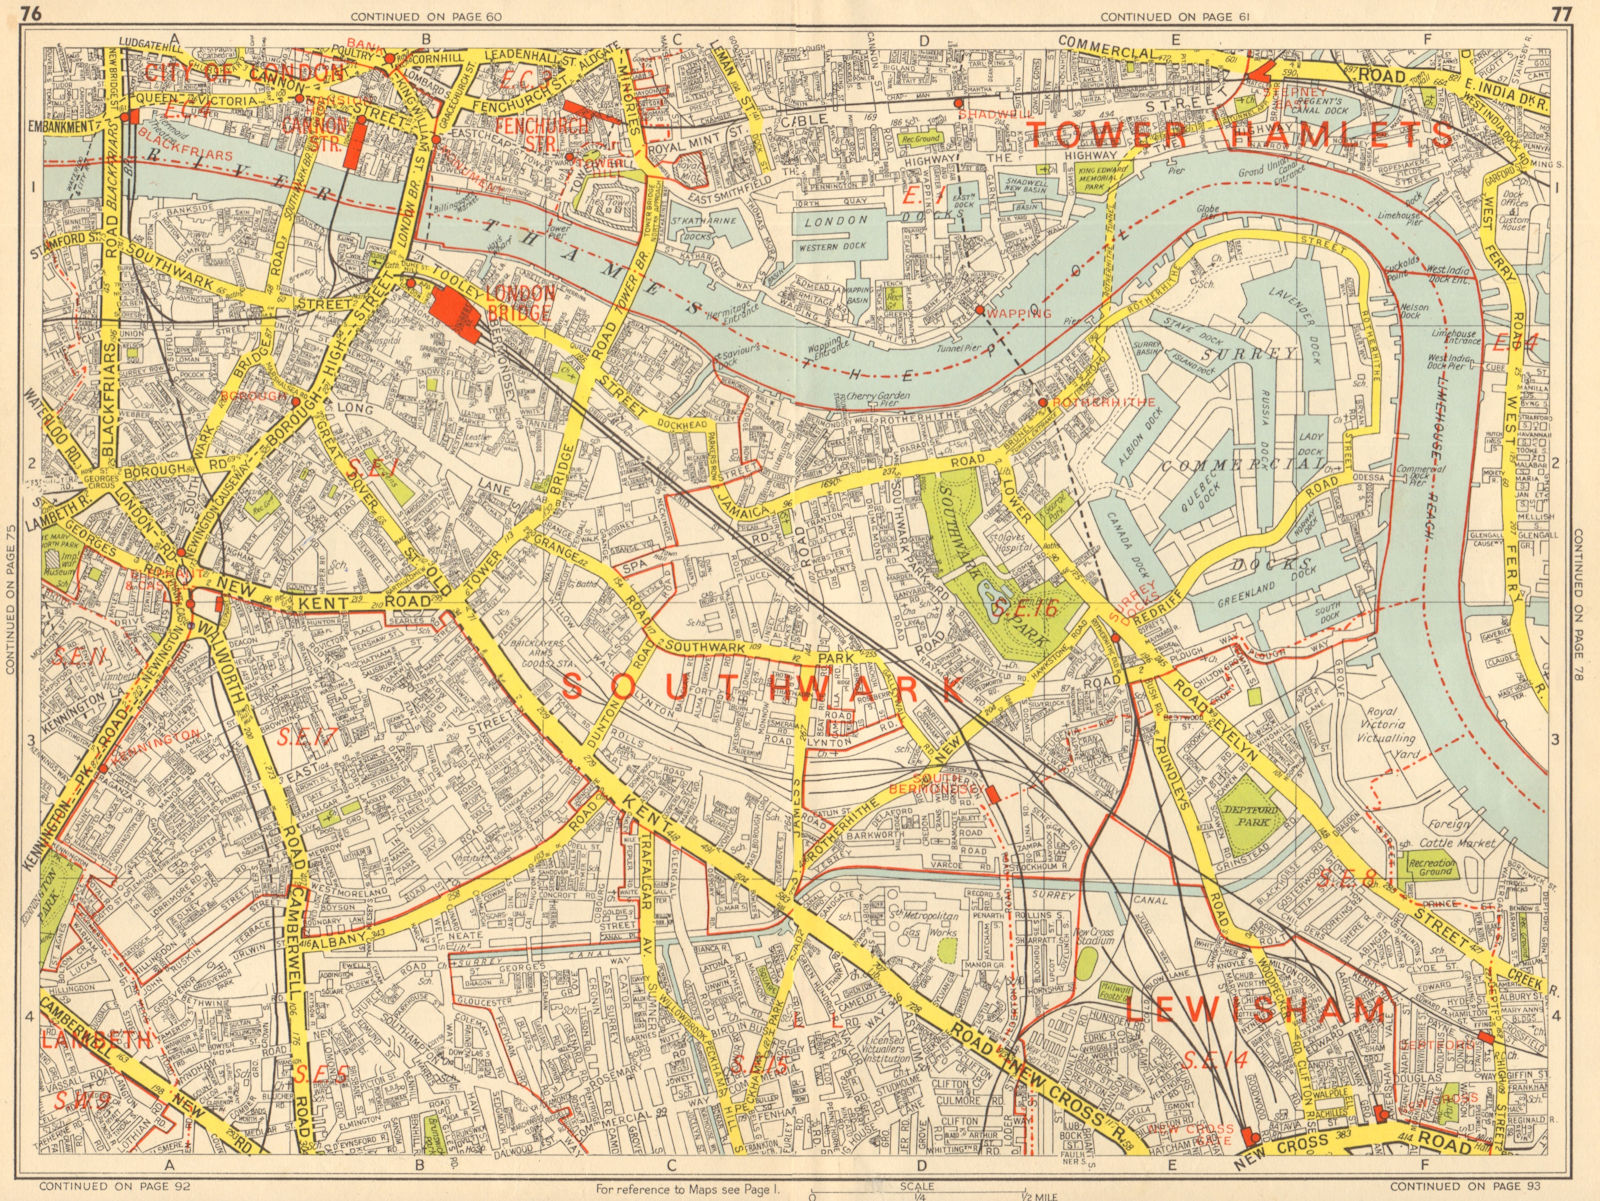 SOUTHWARK Bermondsey Wapping Rotherhithe Camberwell. GEOGRAPHERS' A-Z 1964 map